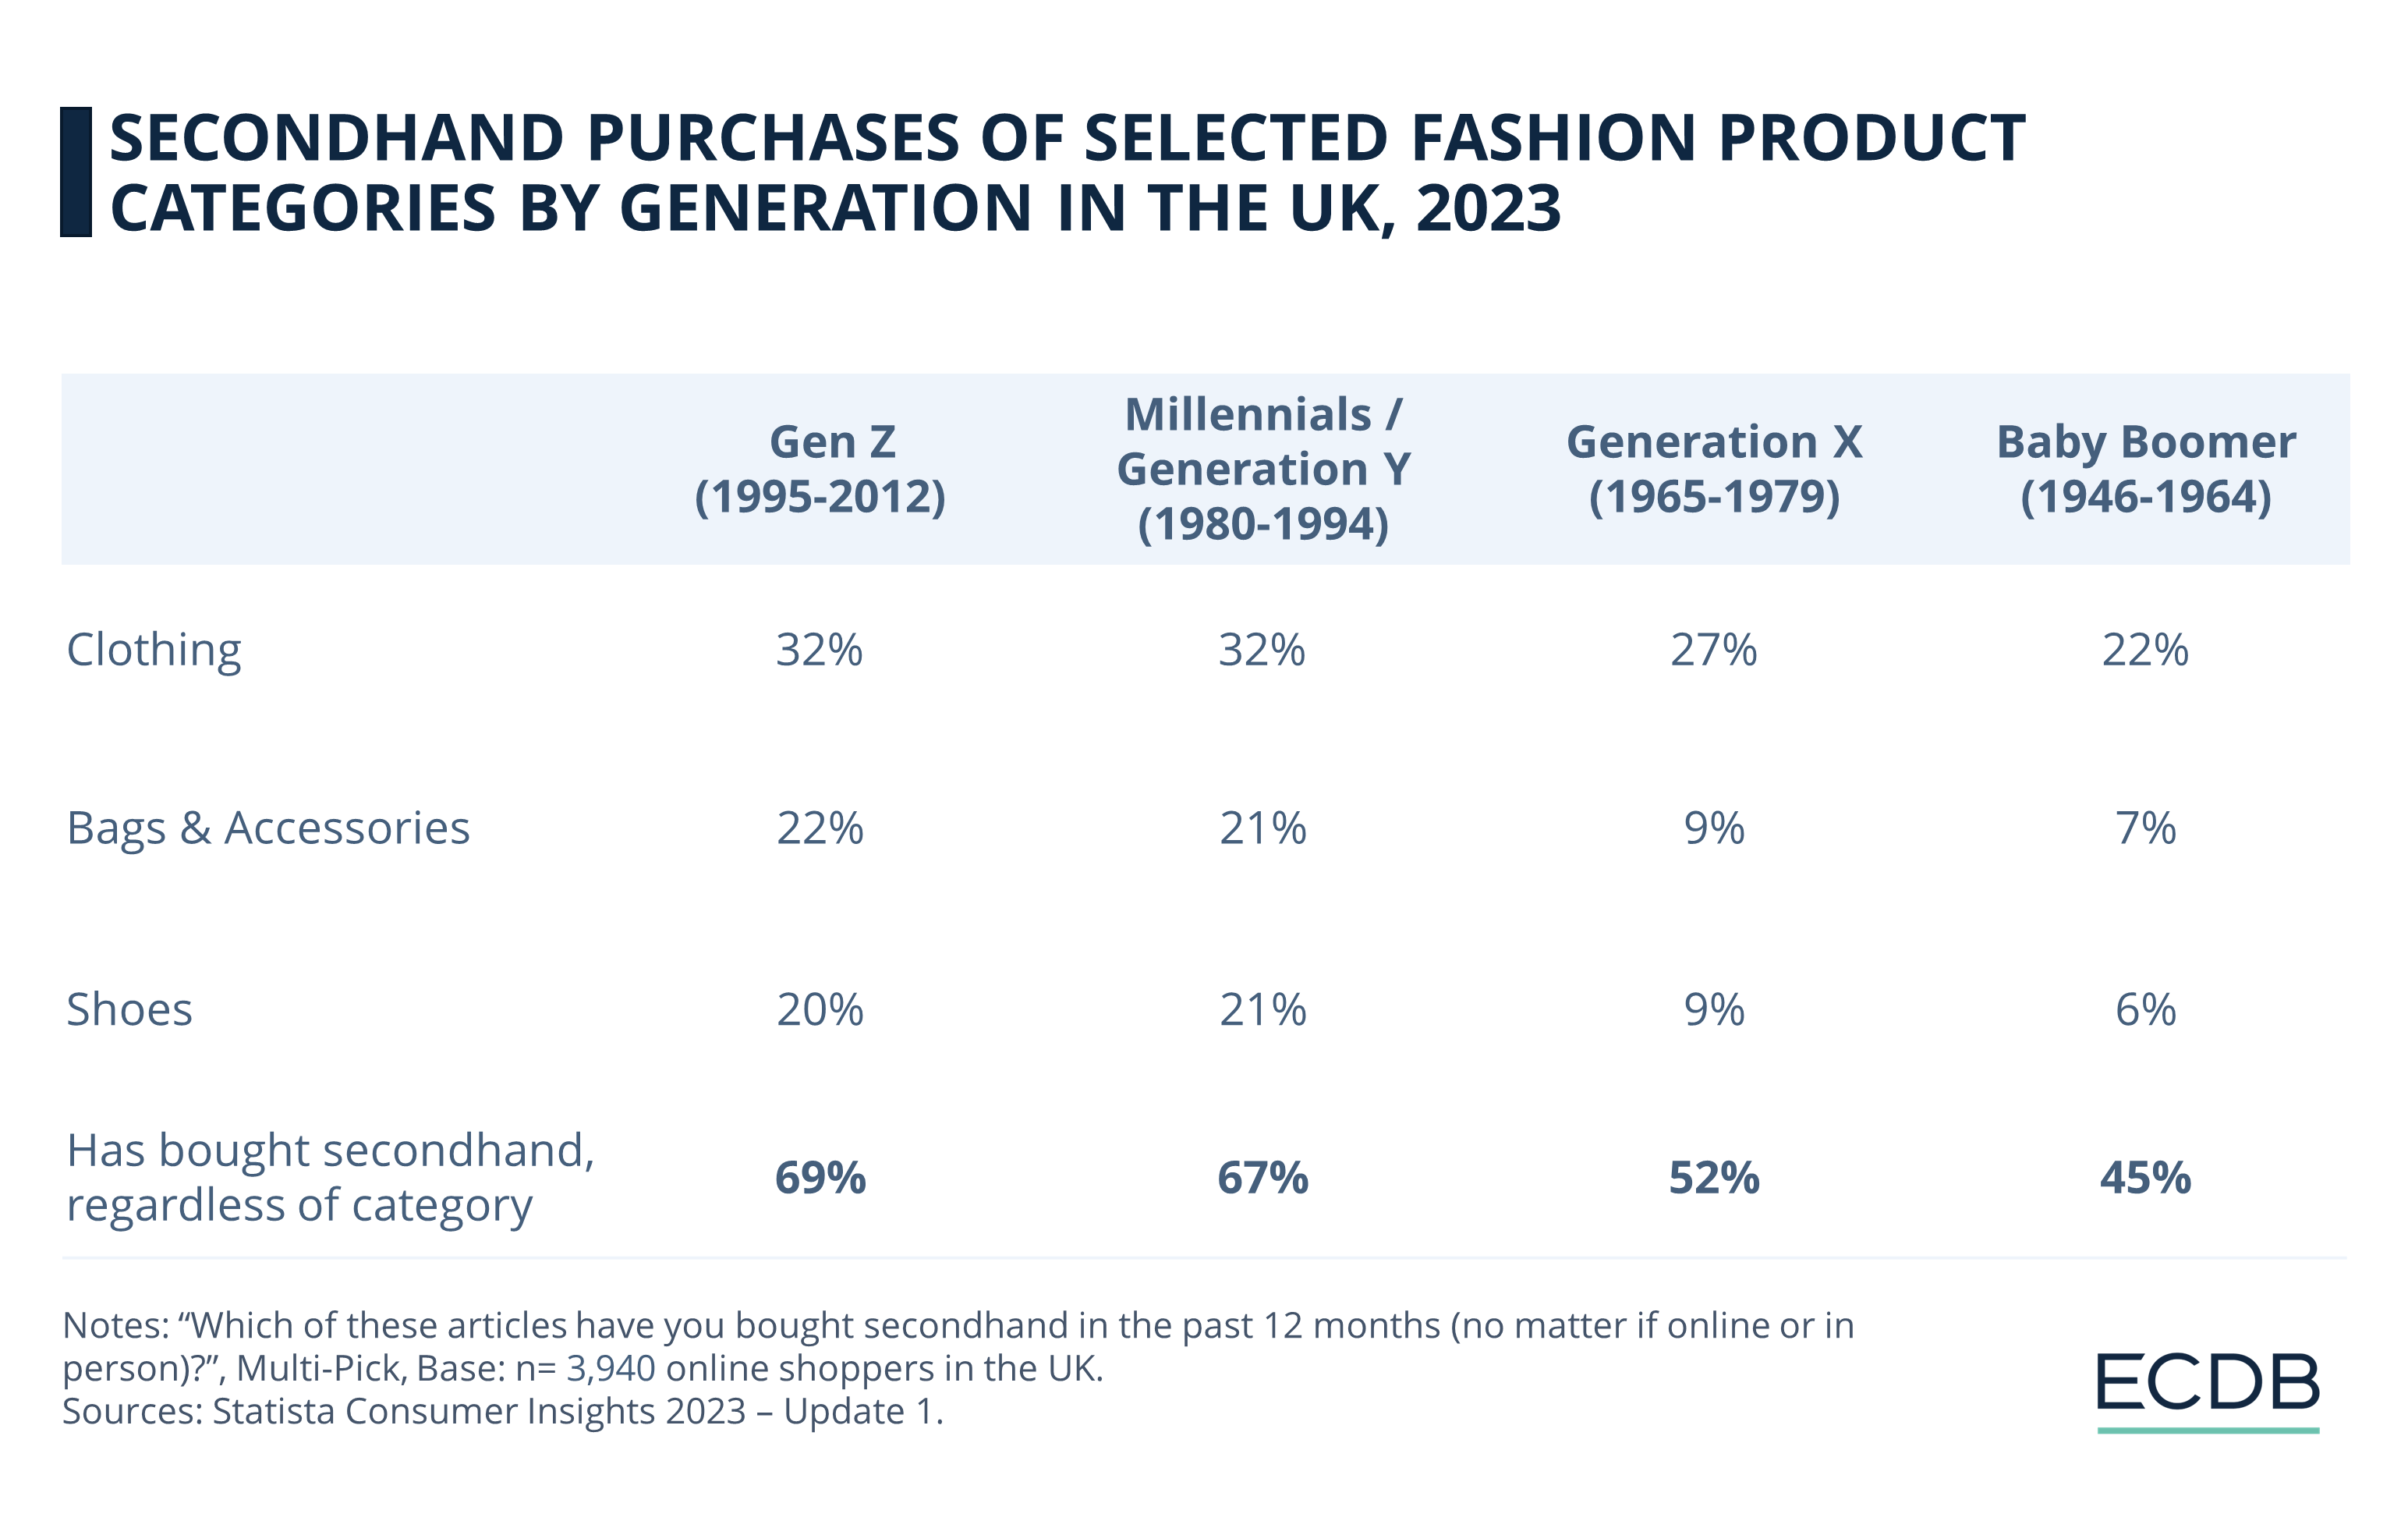 Secondhand Purchases of Selected Fashion Product Categories by Generation in the UK, 2023